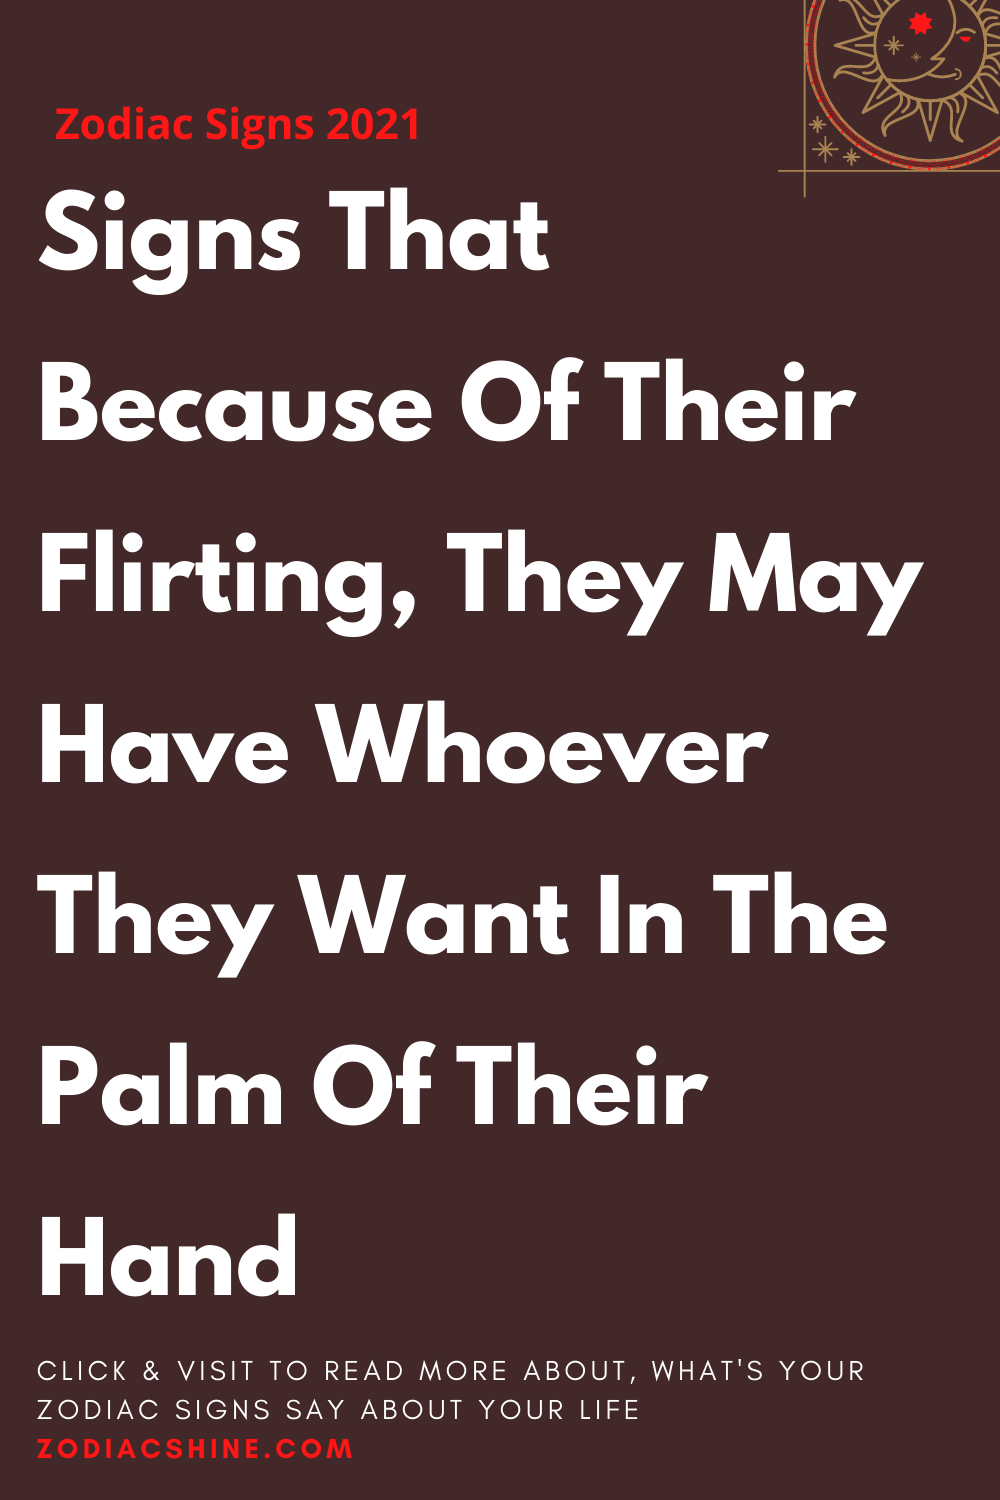 Signs That Because Of Their Flirting, They May Have Whoever They Want In The Palm Of Their Hand